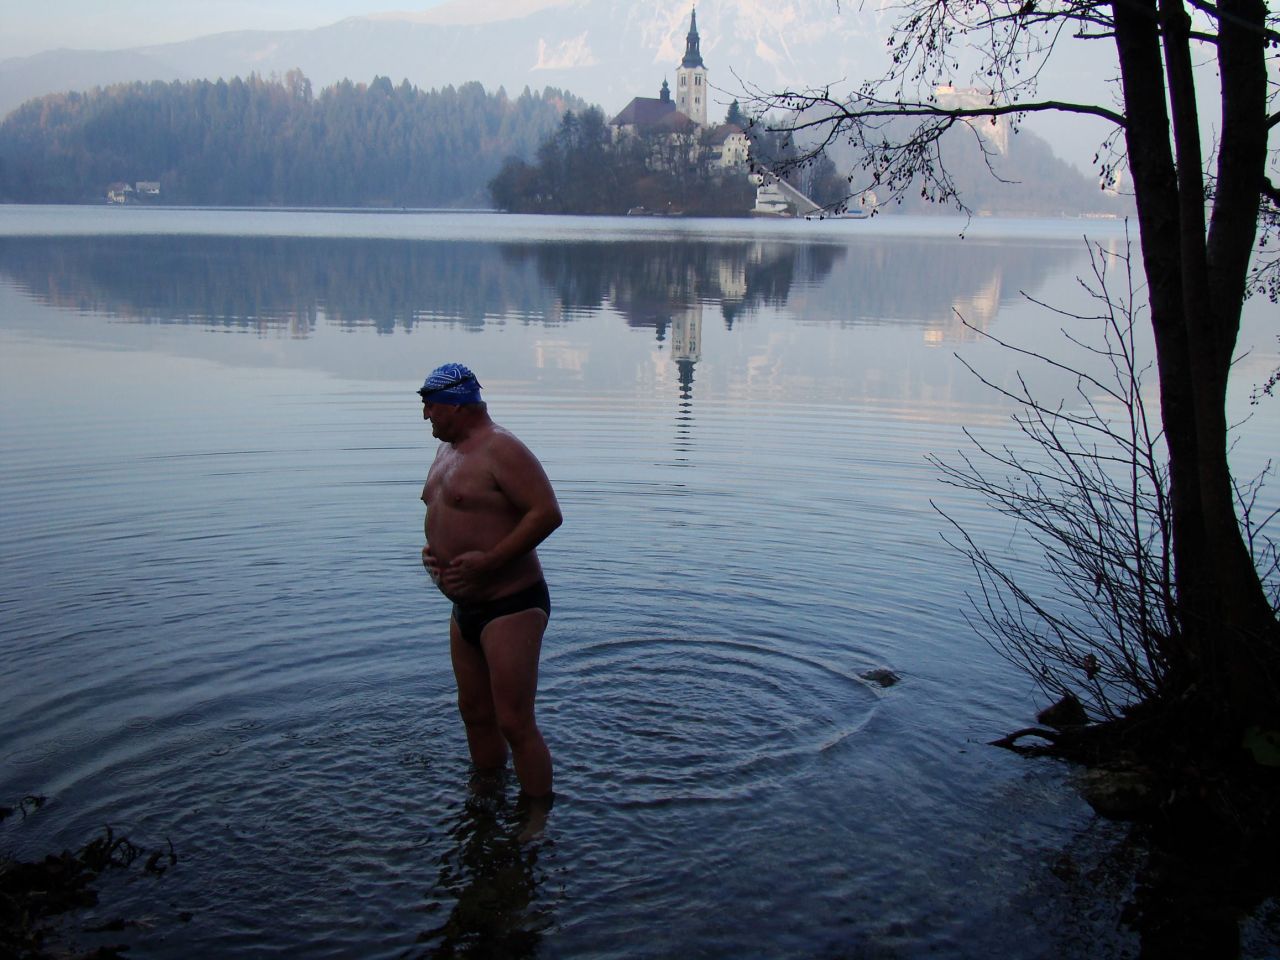 Now aged 67, Slovenian Martin Strel has held multiple world records for swimming the world's longest rivers, including the Amazon, Yangtze and Mississippi. He's pictured training in Lake Bled, Slovenia, in preparation for next year's World Swim, which will cover around 6,835 miles. 